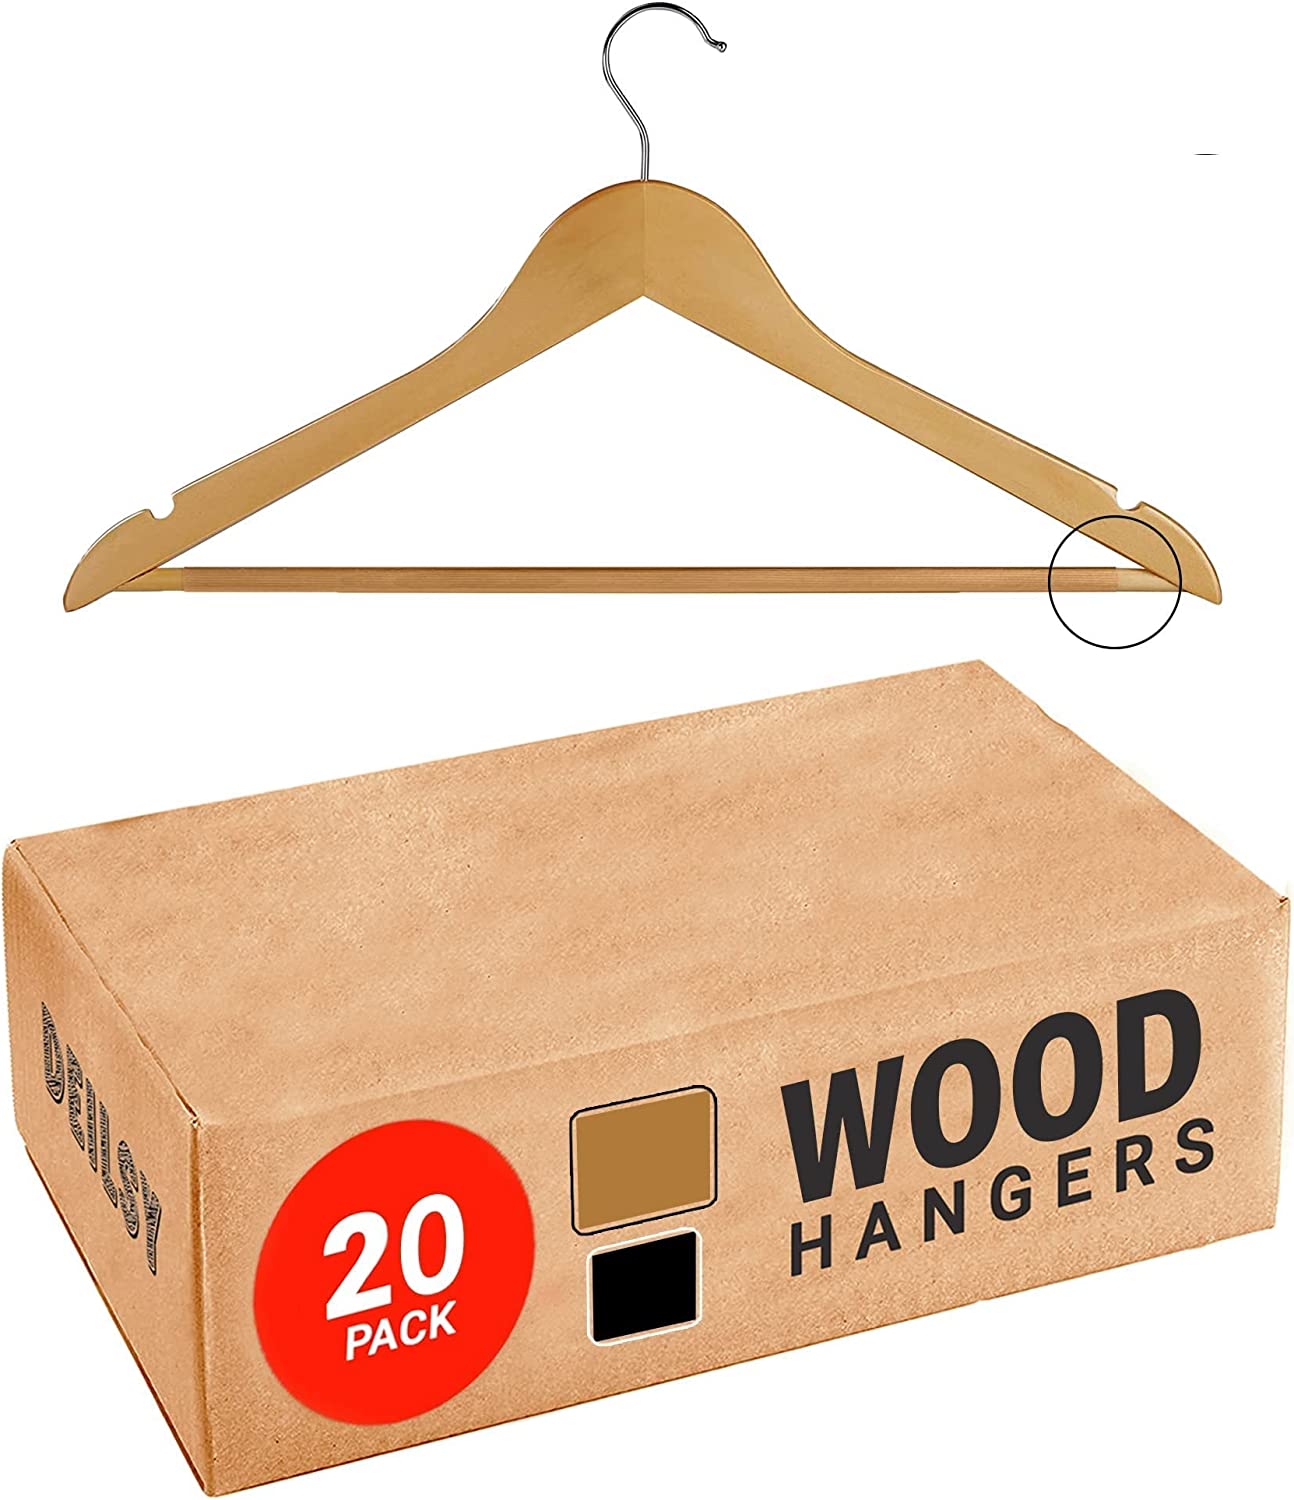 The BEST Way to Pack Clothes Hangers in a Box 